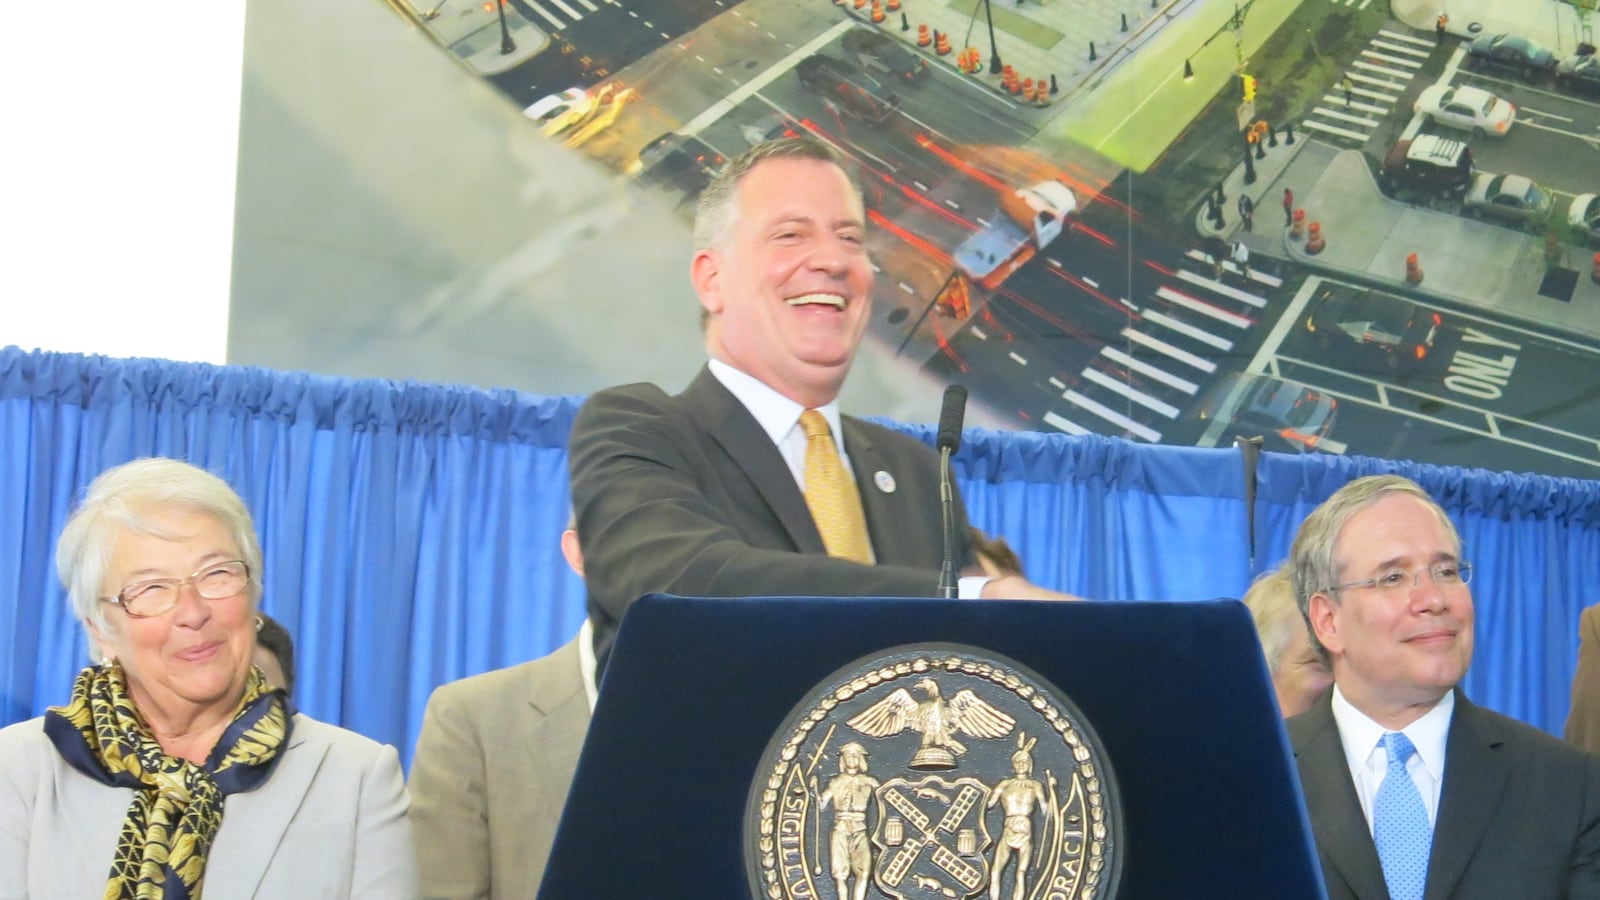 Mayor Bill de Blasio announced how the city would spend an additional $23 million in arts funding at the Bronx Museum of the Arts Tuesday.